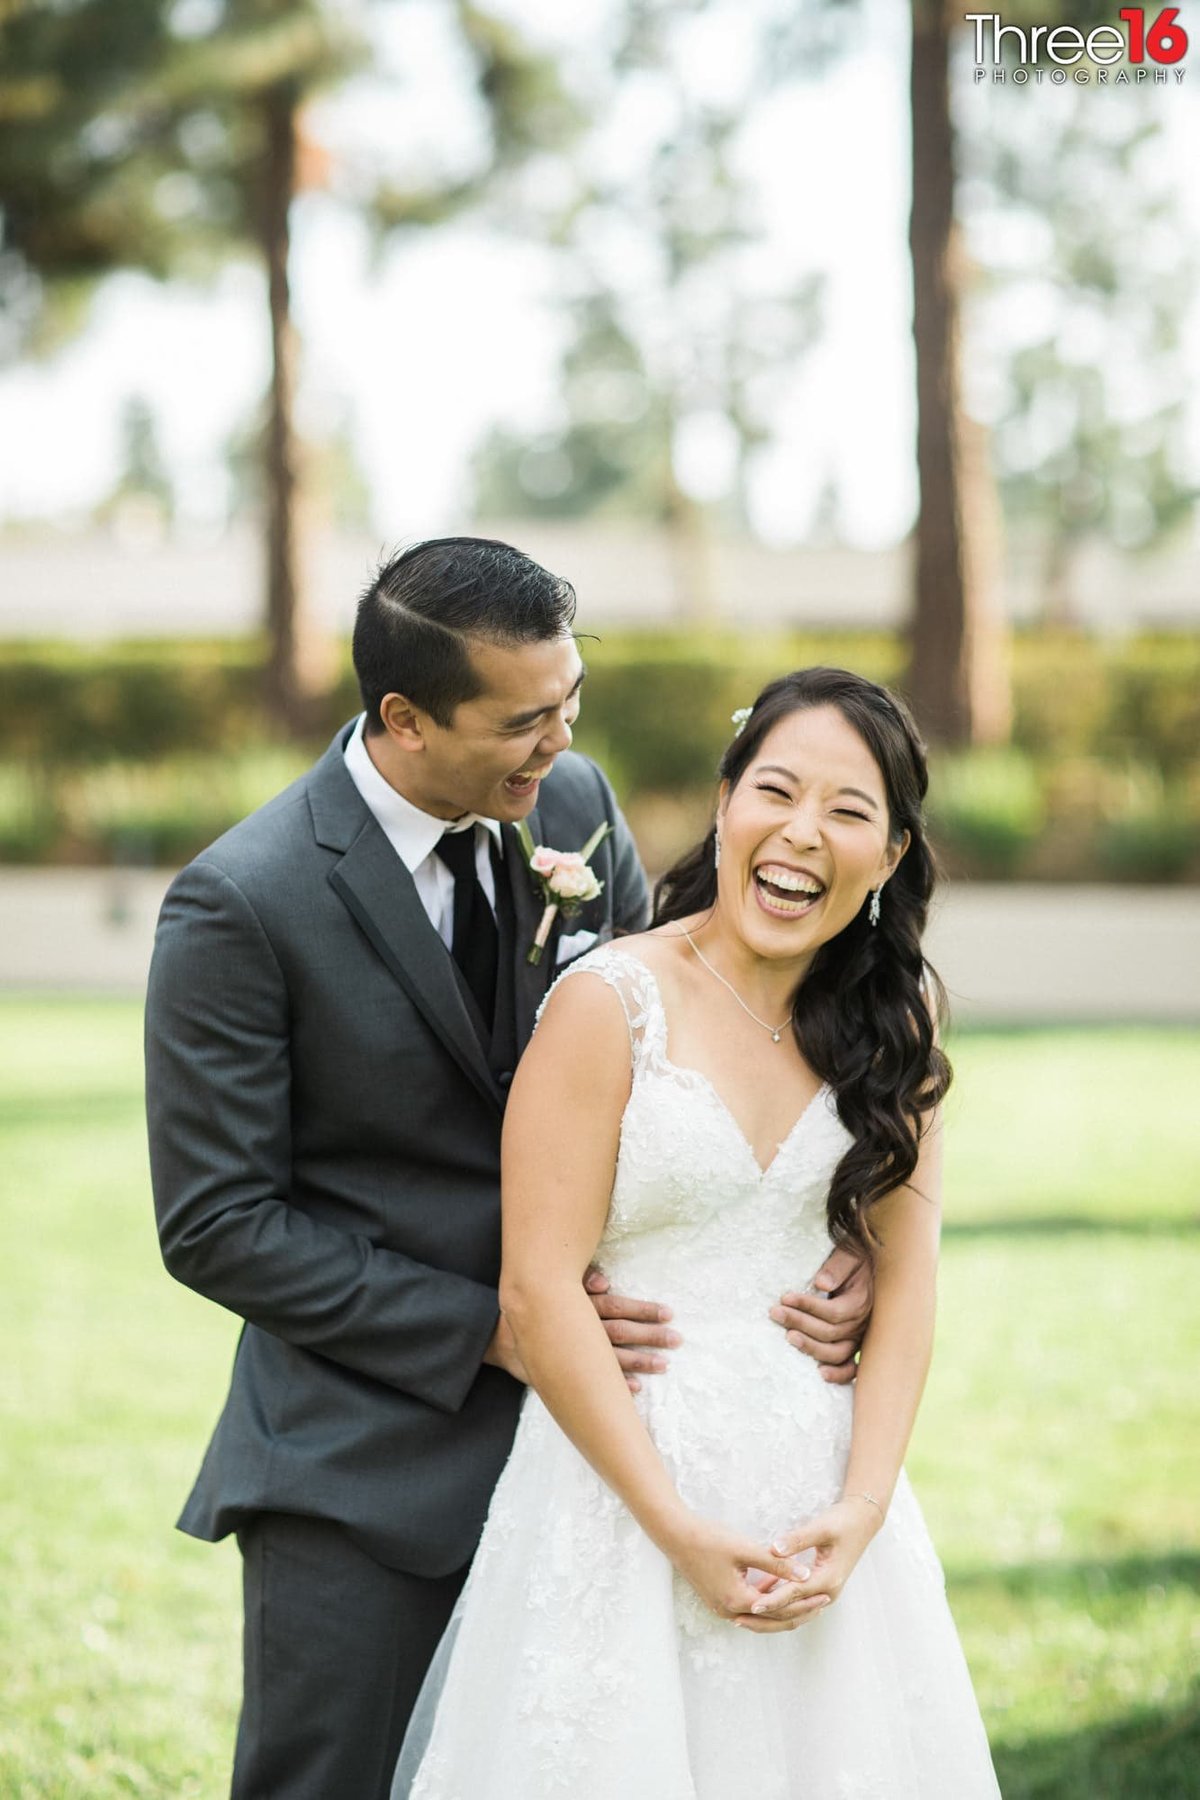 Bride and Groom share a laugh during the photo shoot